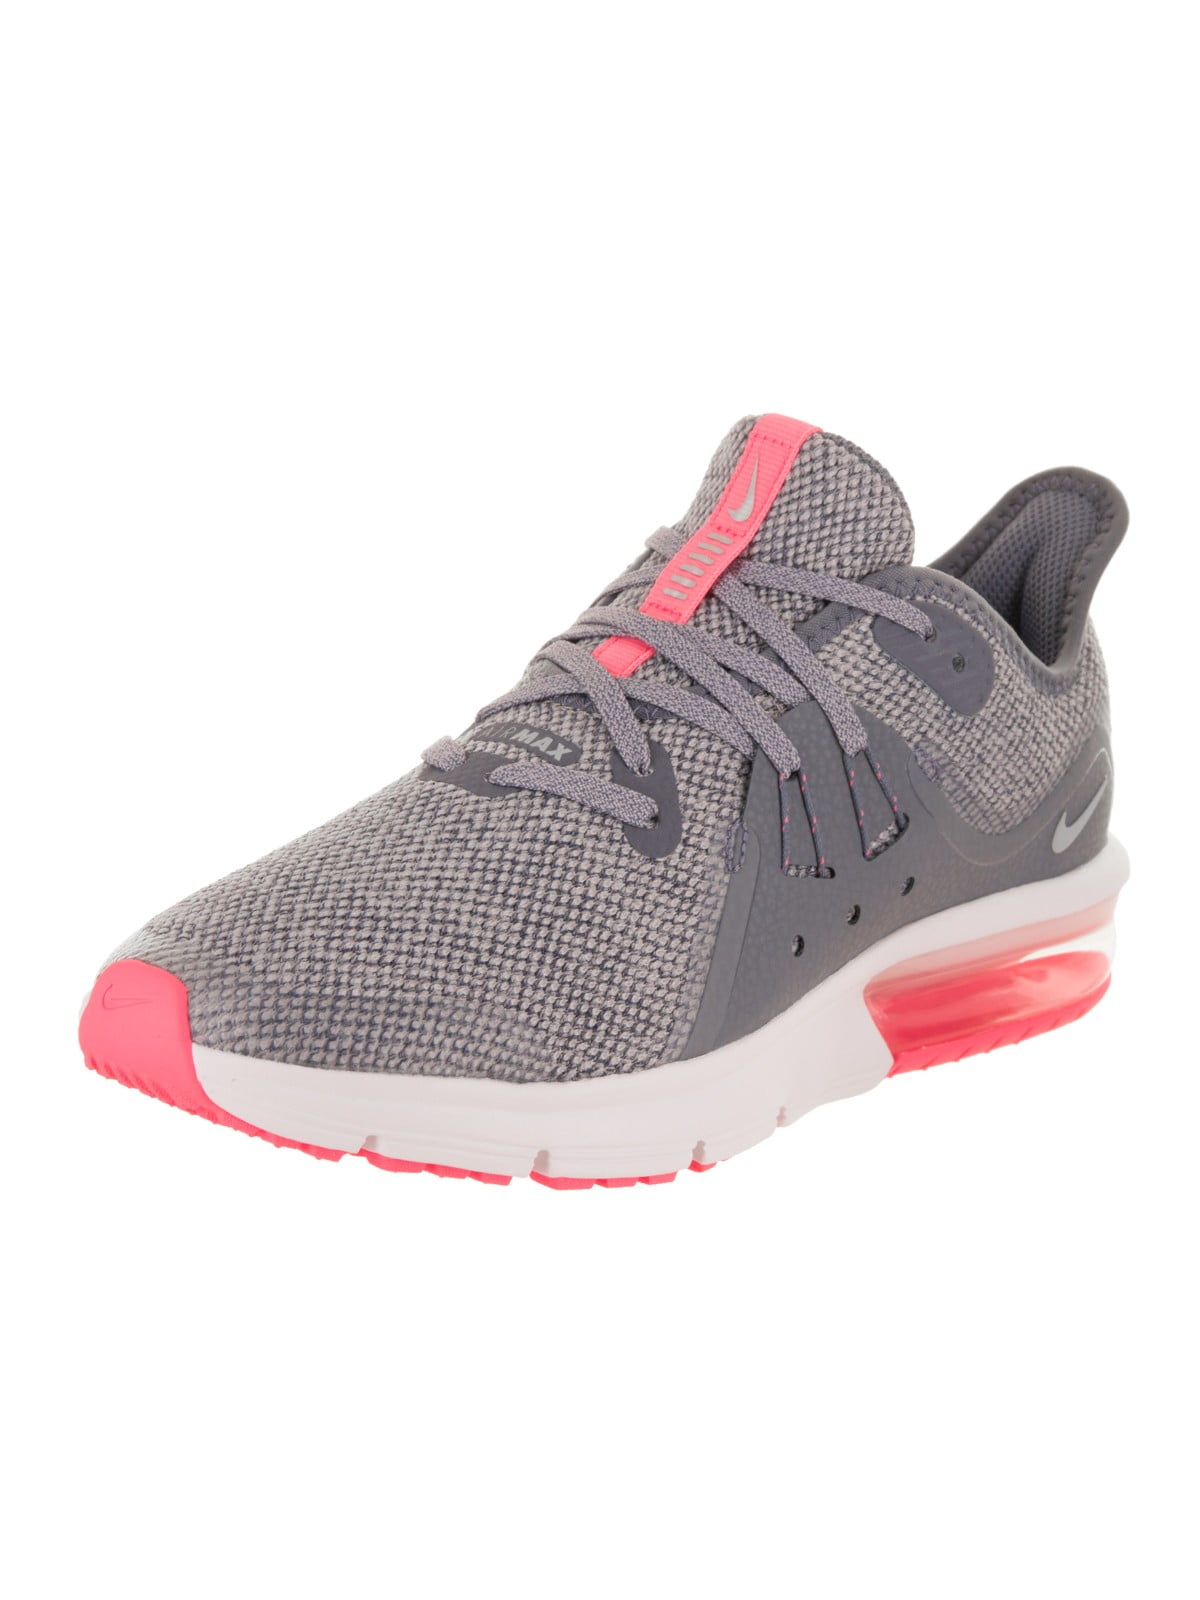 air max sequent 3 gs running shoe